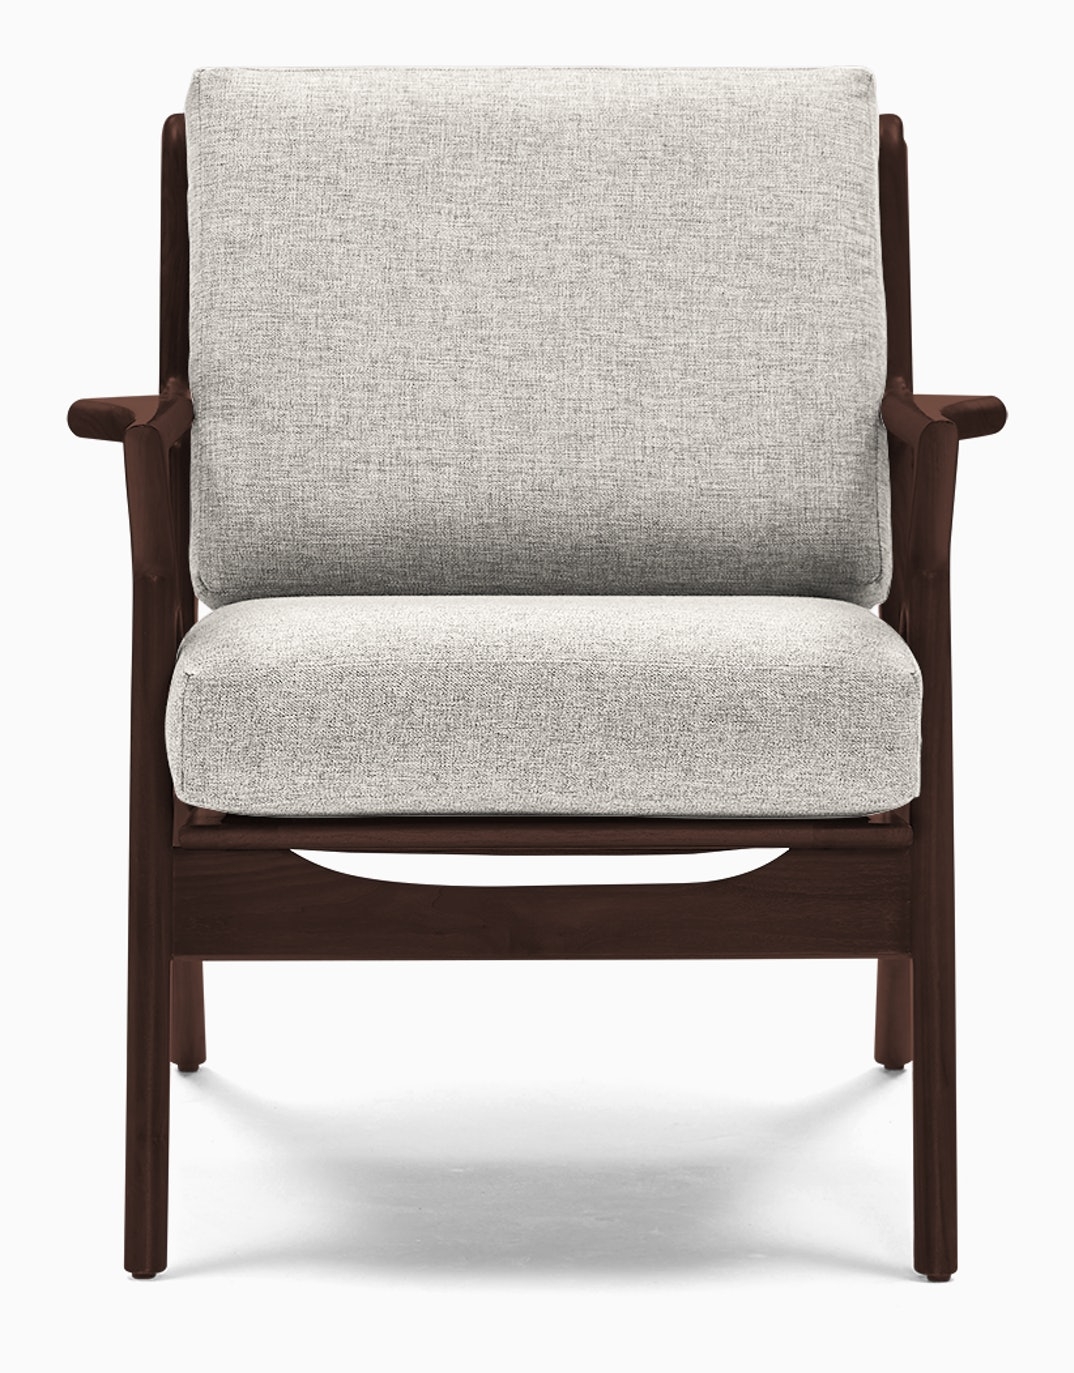 Soto Chair - Image 4